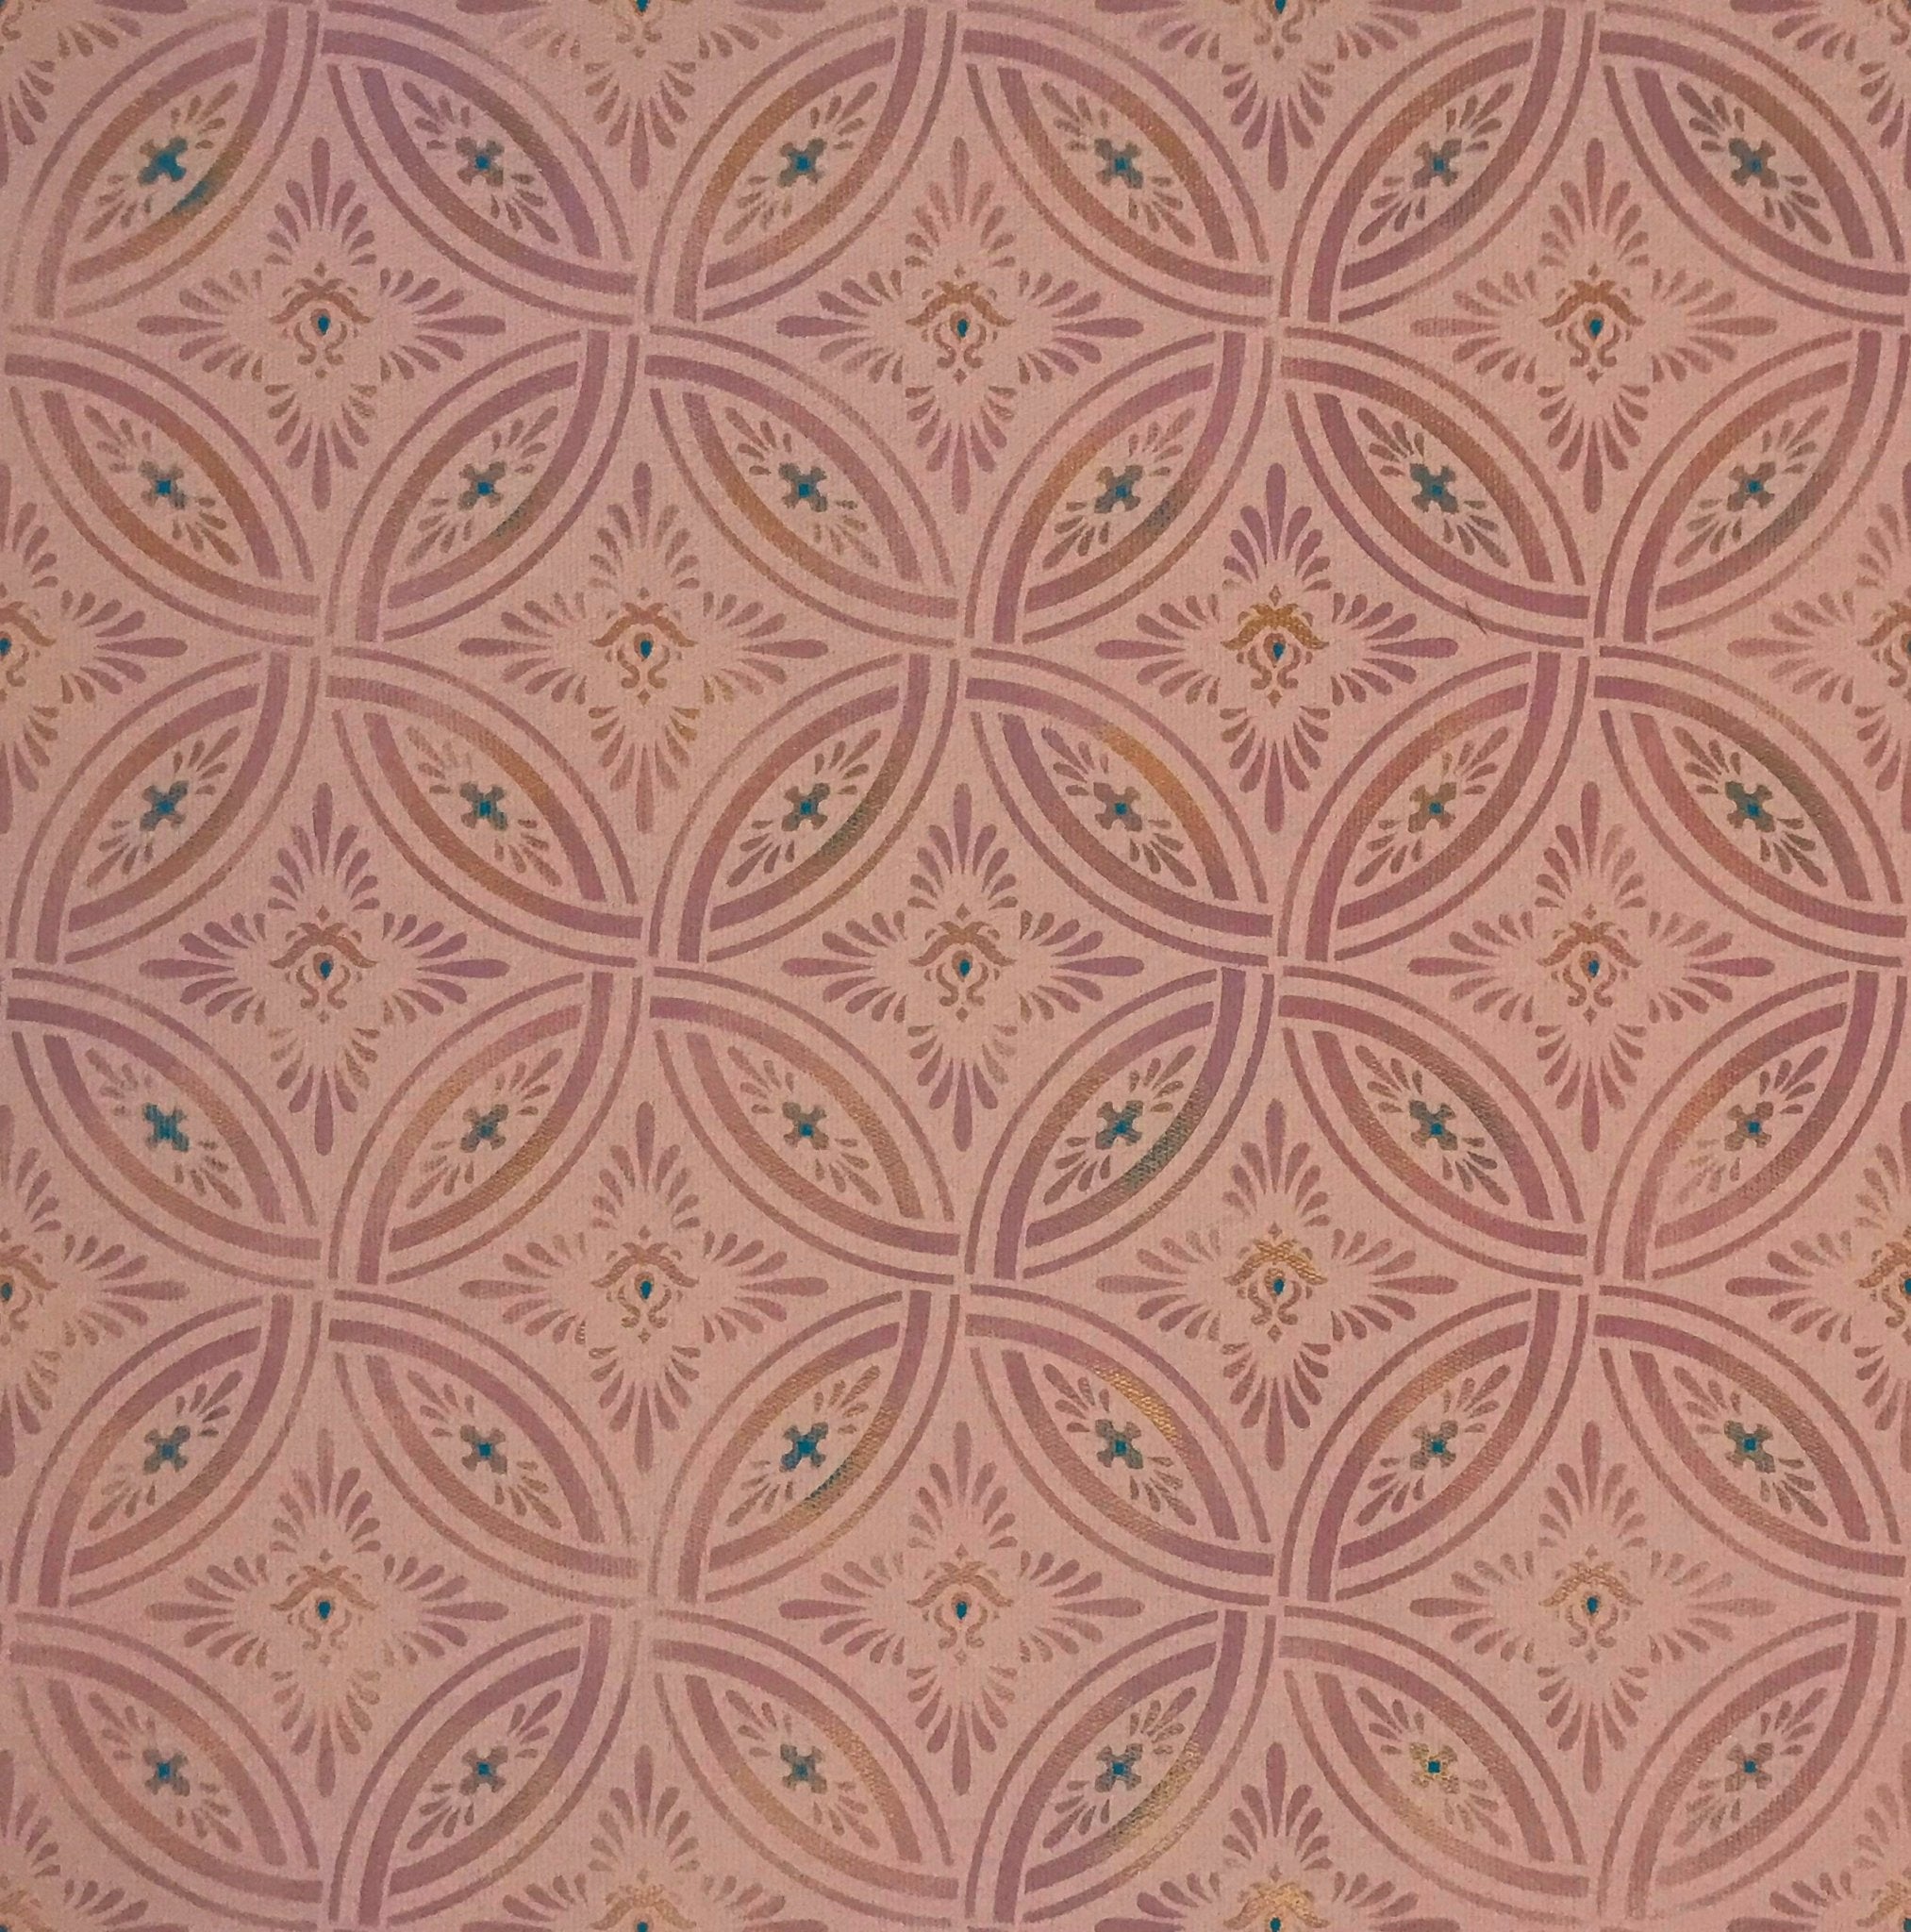 A close up of the all over interlocking circle pattern for Grace Floorcloth #1.